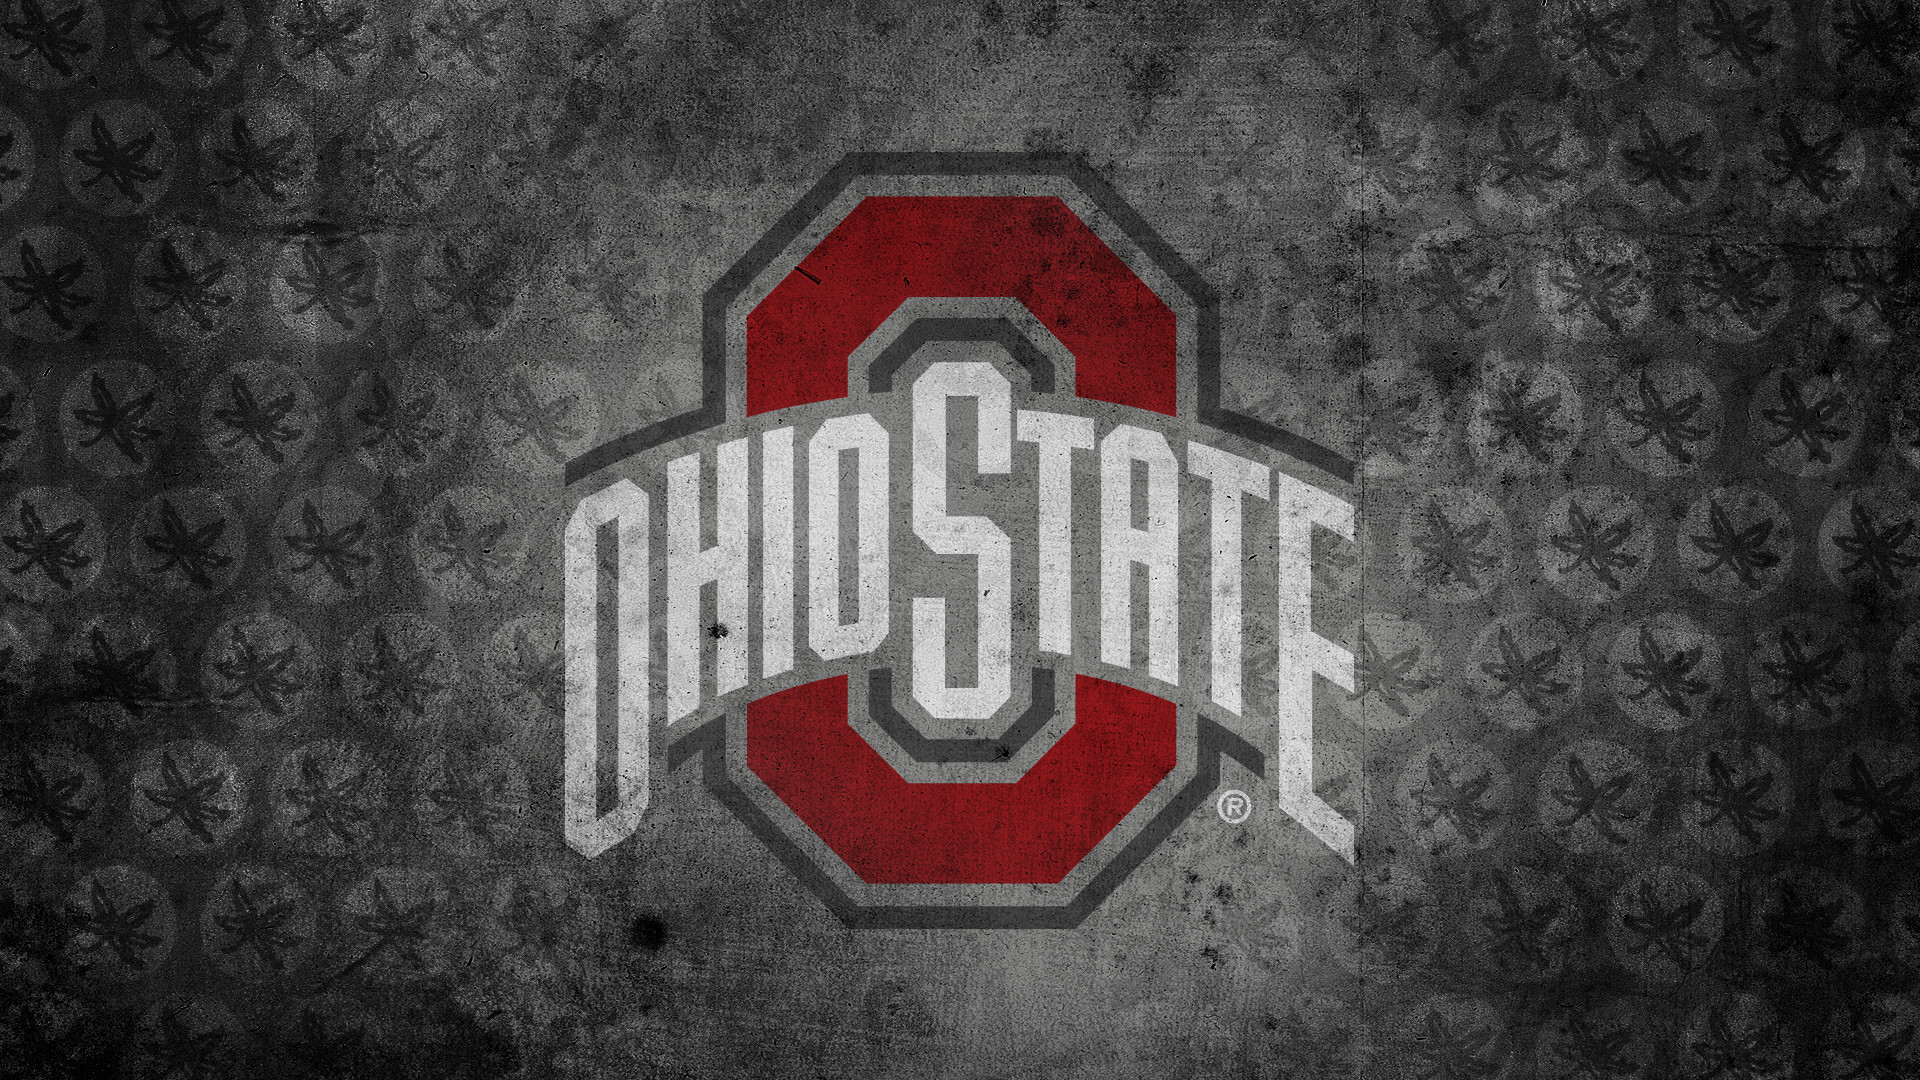 1920x1080 ... Ohio State Wallpaper 2015 - 1080p by Salvationalizm